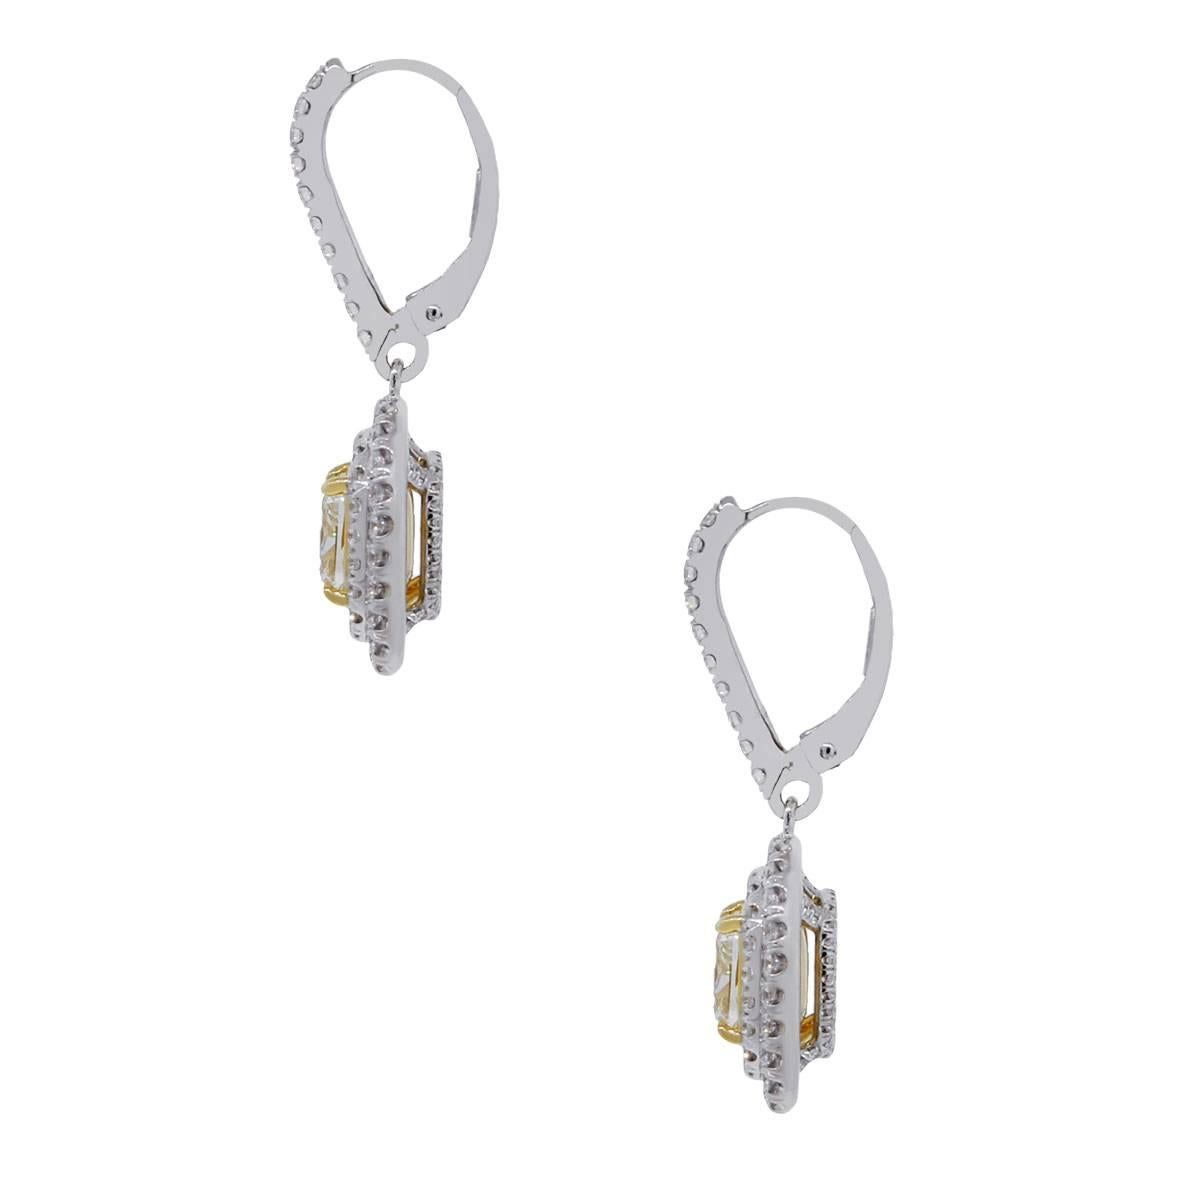 Material: 18k yellow gold and 18k white gold 
Diamond Details: 2.32 carat cushion cut diamonds that are fancy light yellow in color and VS2 in clarity. GIA Certified (6167372618) (2165676982)
Accent Diamond Details: Approximately 2.01ctw round